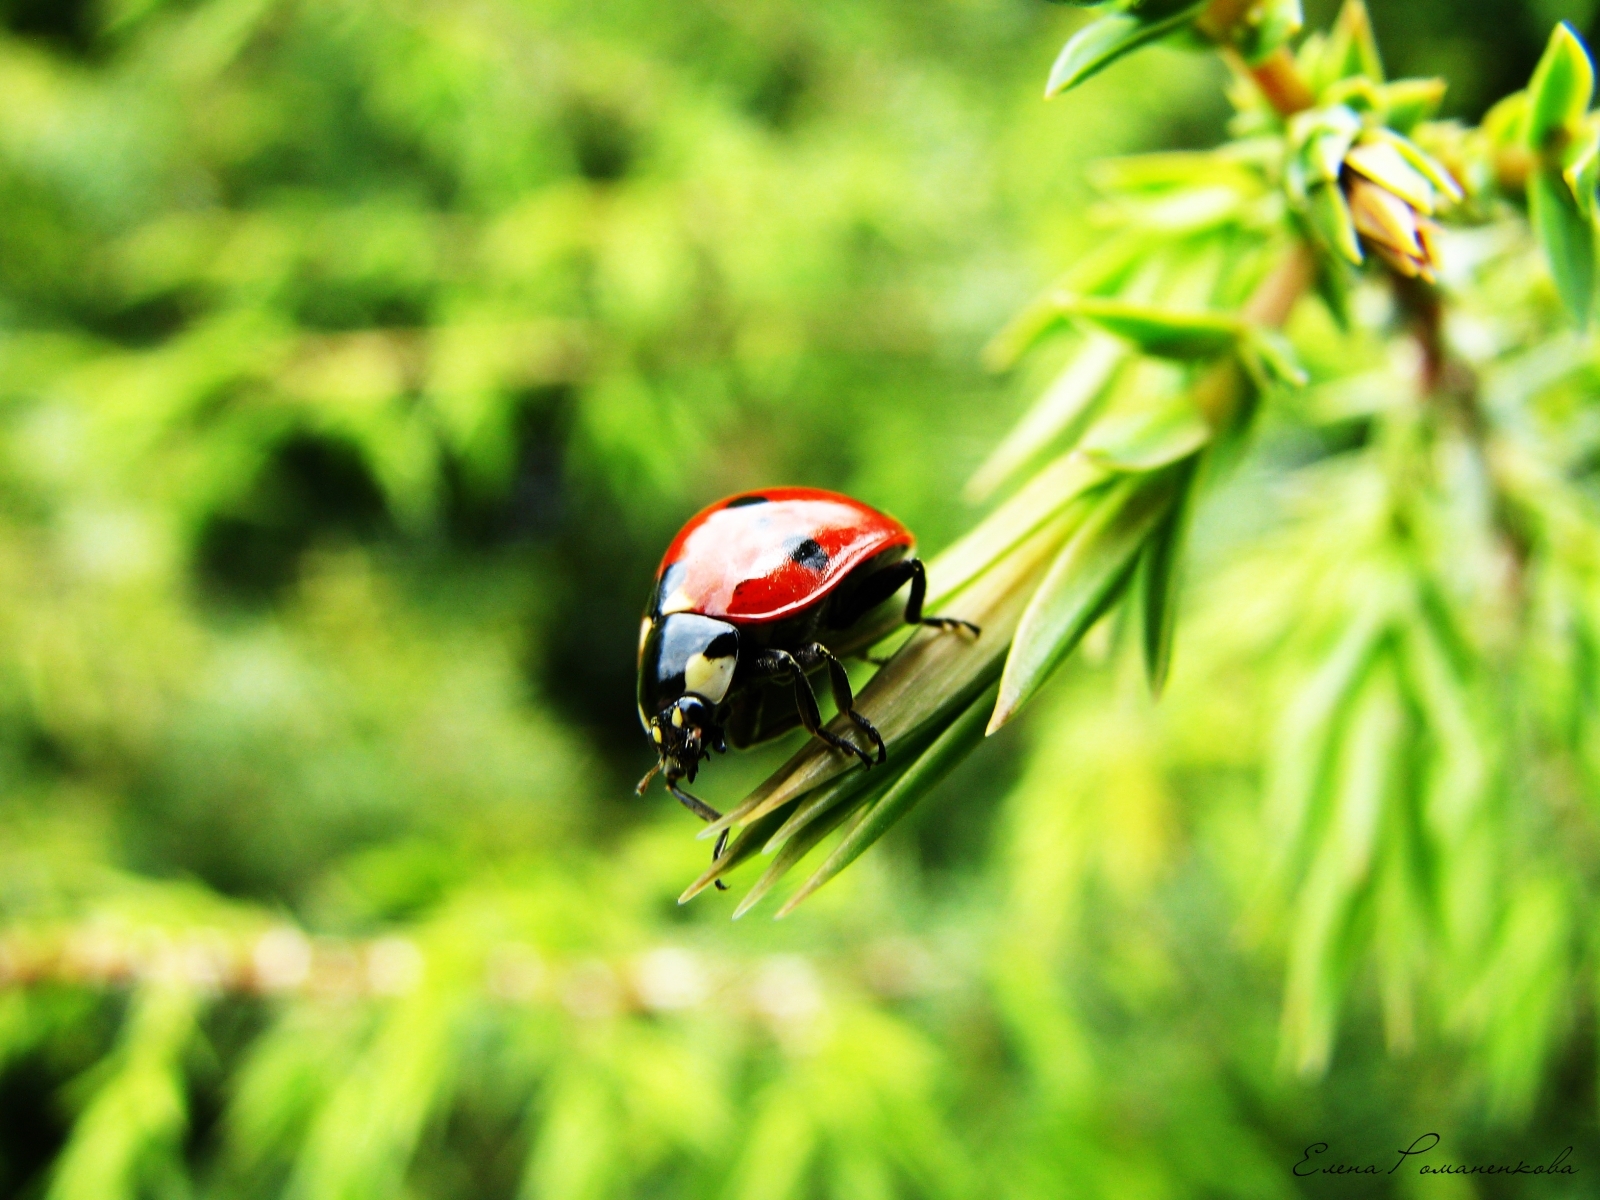 New Lock Screen Wallpapers nature, insects, ladybugs, green